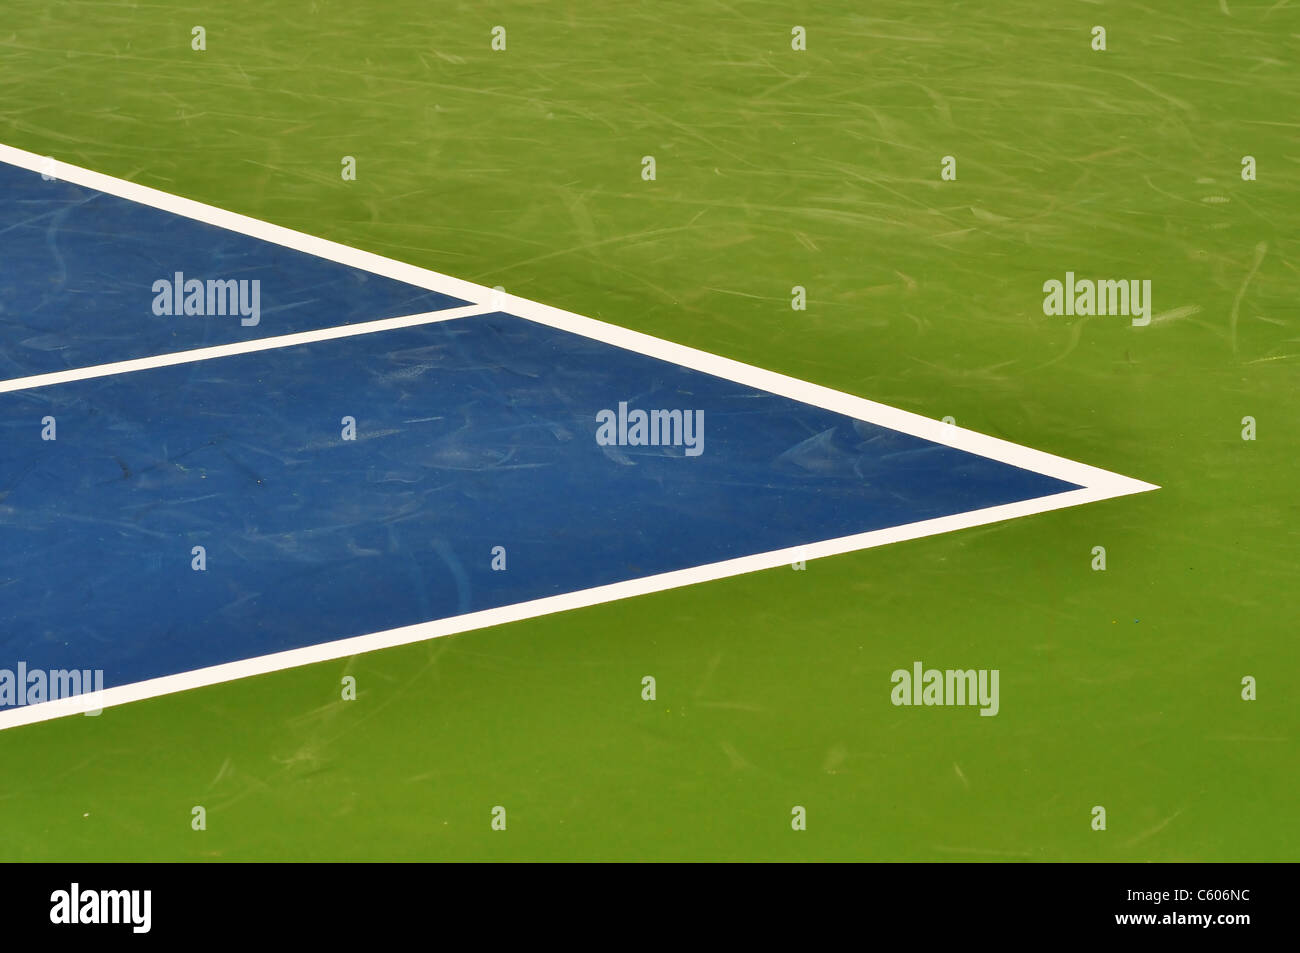 Synthetic tennis court boundary line with great details of the marks left by previous players shoes, great sport background. Stock Photo